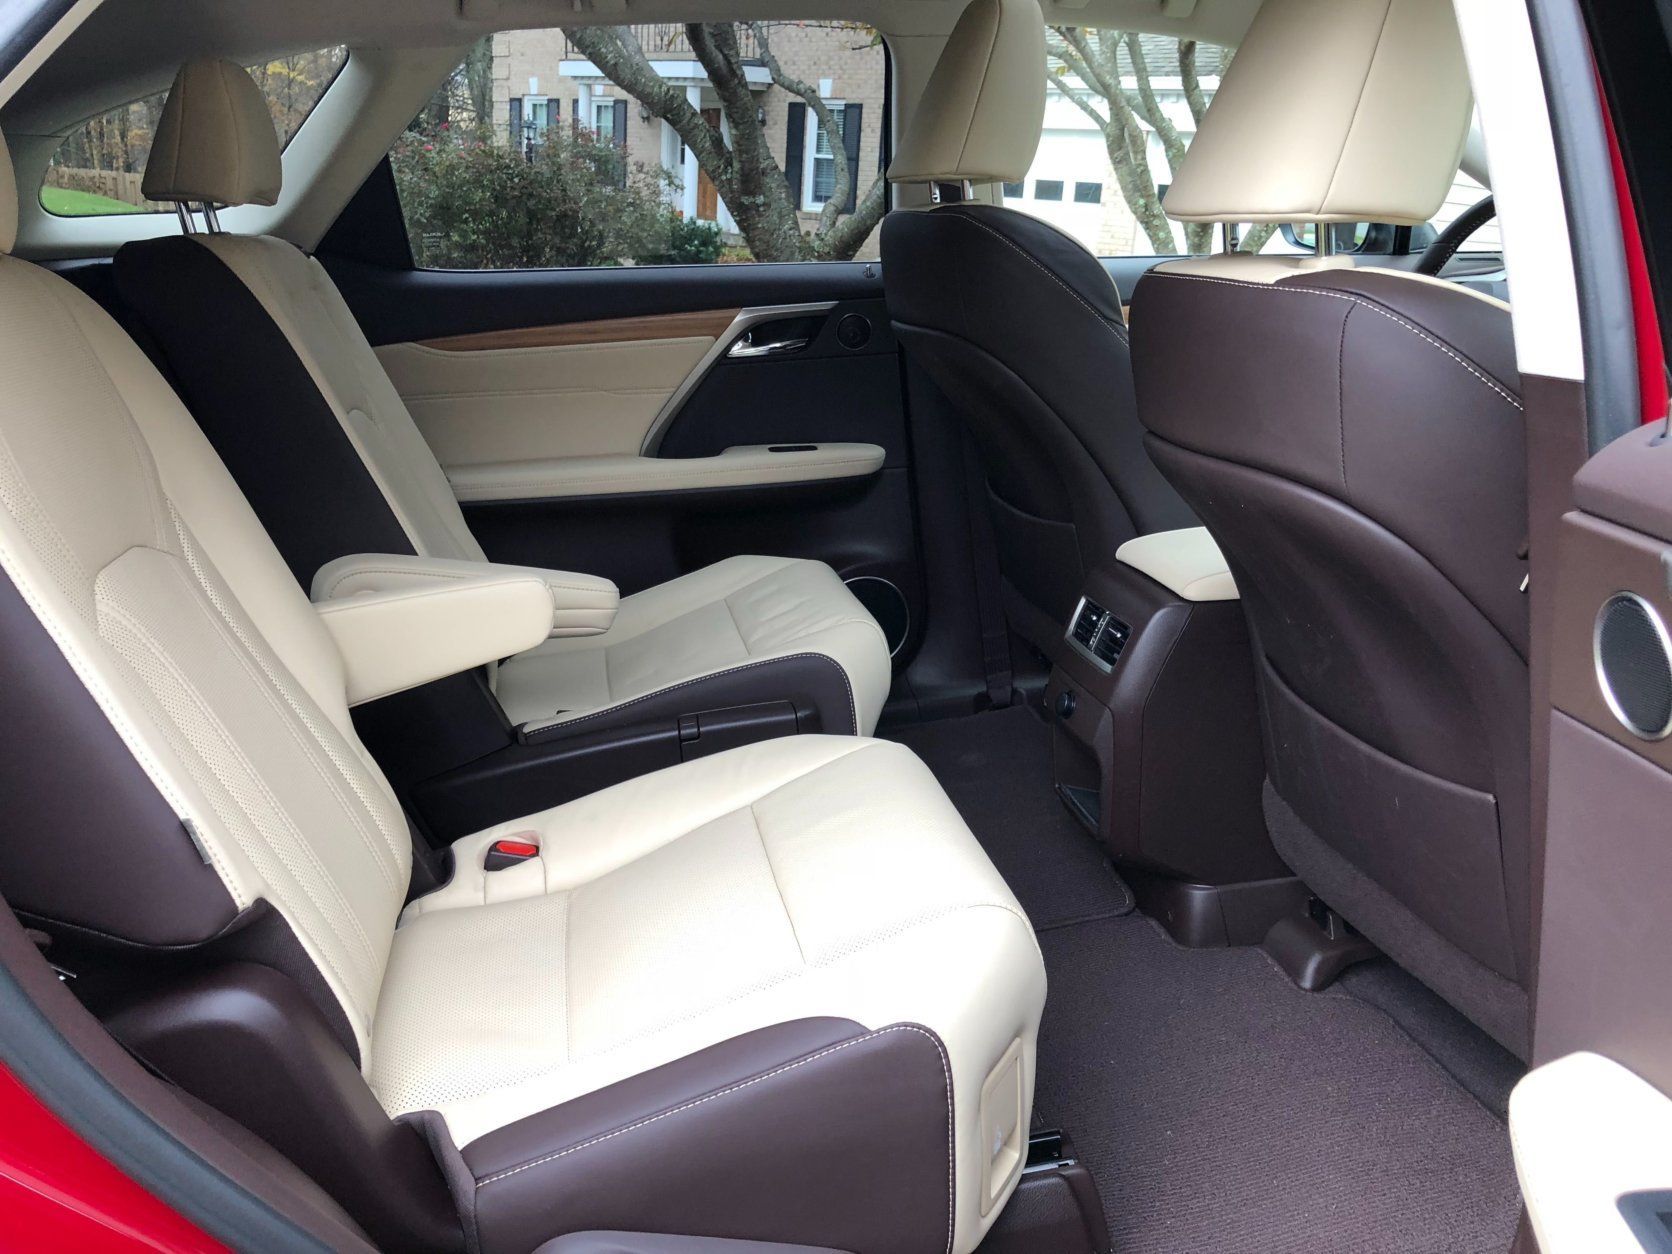 <p>Both RX models have plenty of space for front and backseat riders with a decent amount of head and leg room for the crossover class.</p>
<p>The second row of the RX 350L had optional captain’s chairs limiting it to two people. The RX 350L is stretched by over 4 inches allowing space for a third row of seats. That third row is a great addition but it’s really meant for children or smaller adults on short trips only. Getting in and out of either RX is easy with large doors.</p>
